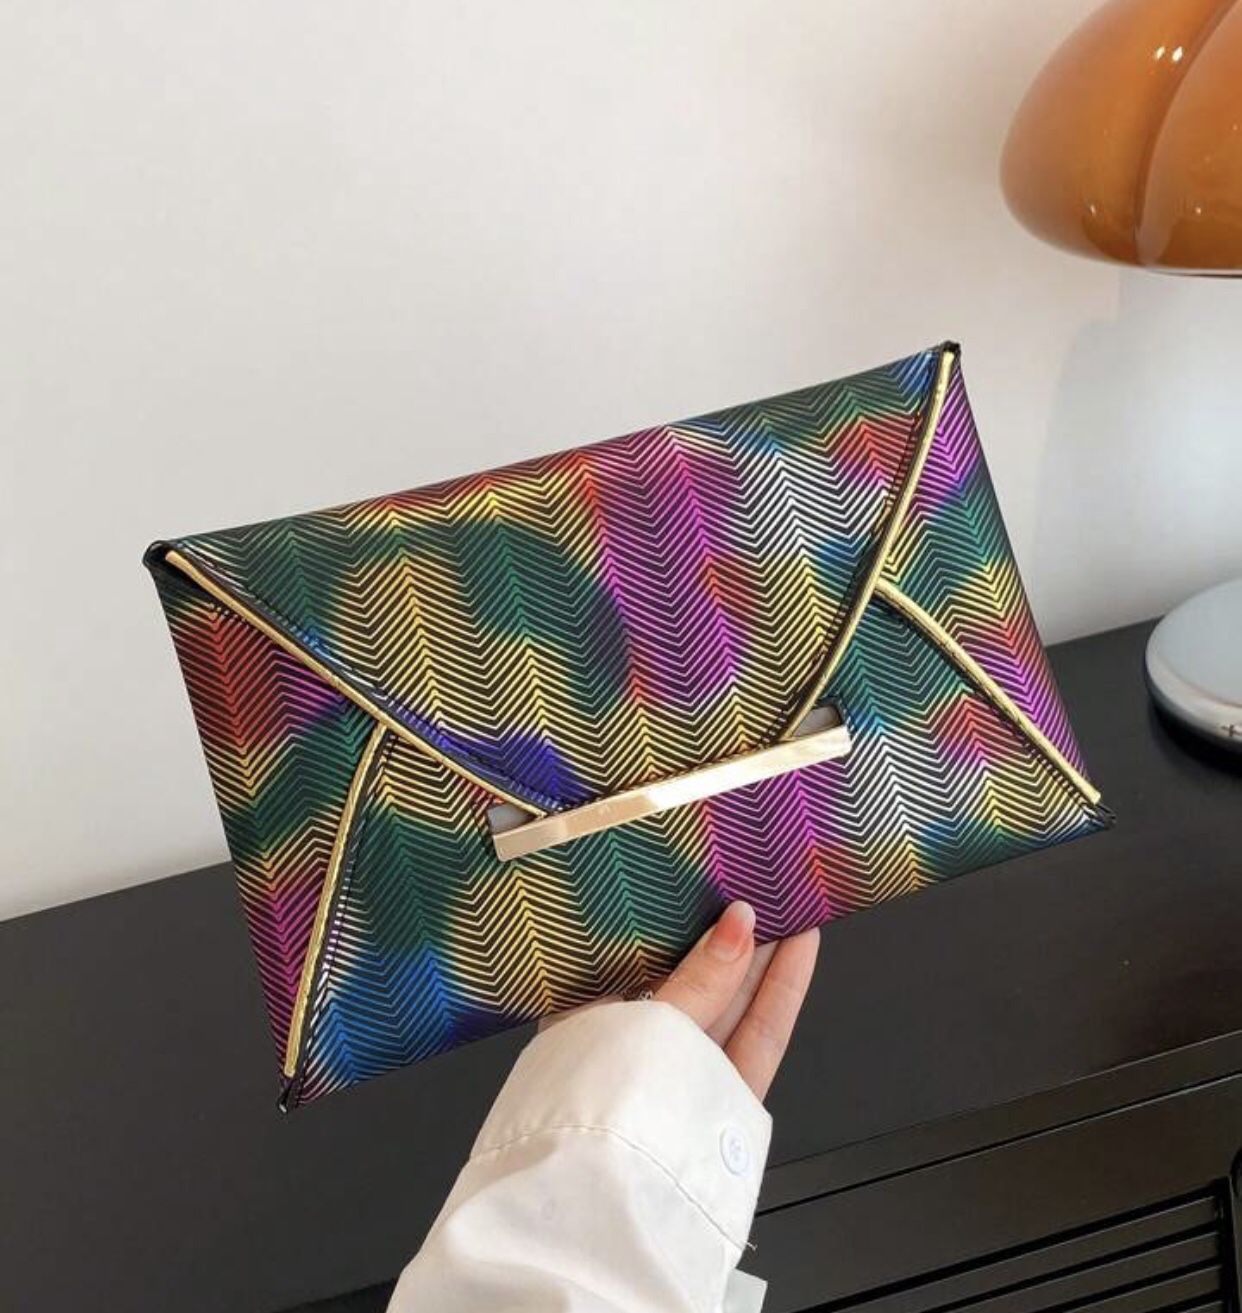 New! Fashionable Colorful Women's Clutch Bag